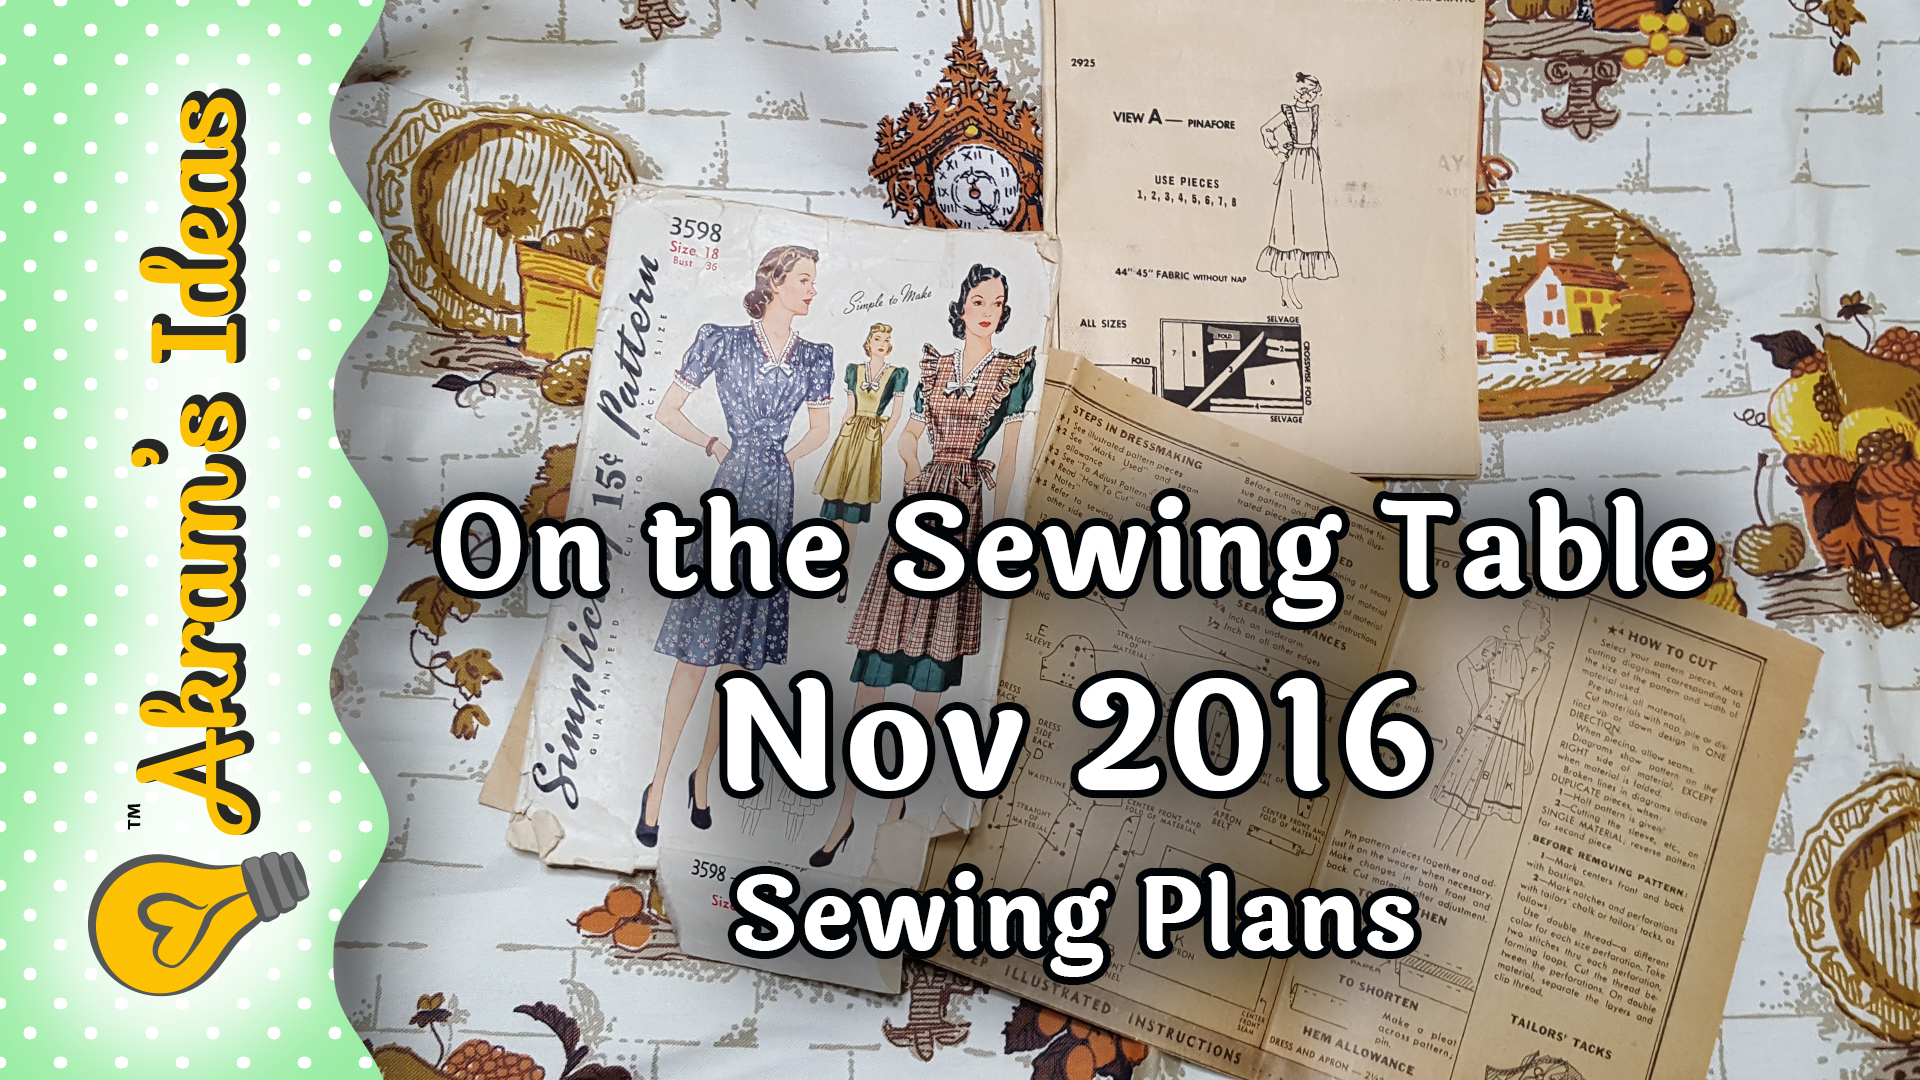 On the Sewing Table , a look at what I’ve got planned for sewing November 2016.